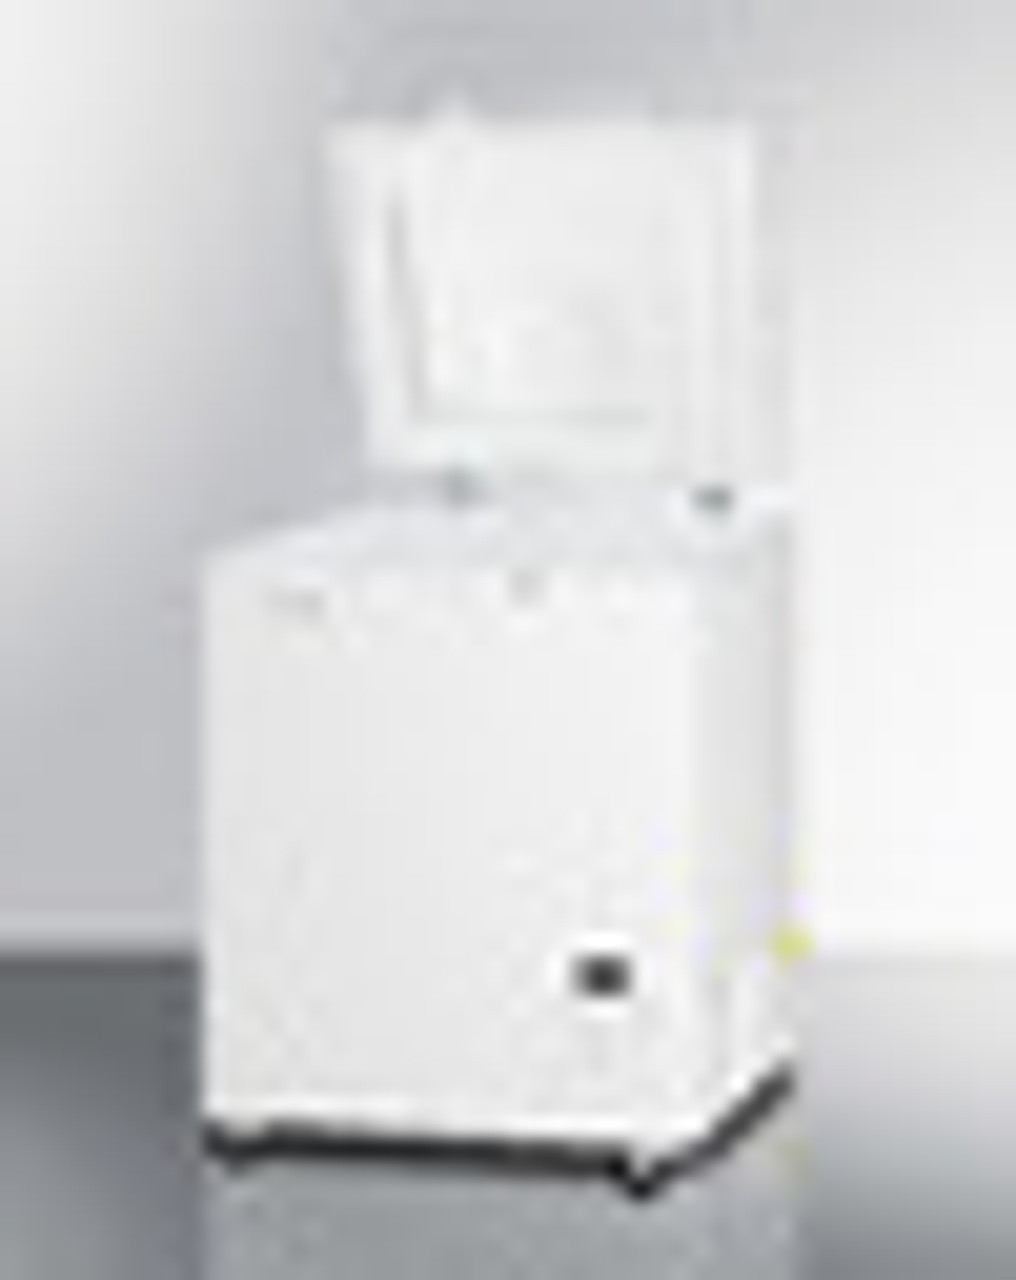 Chest Freezer, 29"W, 4.8 cu. ft. capacity, (1) solid lift-up door with remain-open feature, handle-mounted lock, -45°C operation, manual defrost, digital thermostat & display, probe hole, self-contained side mounted refrigeration, R404a refrigerant, white exterior & door finish, (4) casters, 115v/60/1-ph, 3.36 amps, UL, UL-Sanitation (Commercial & Medical)